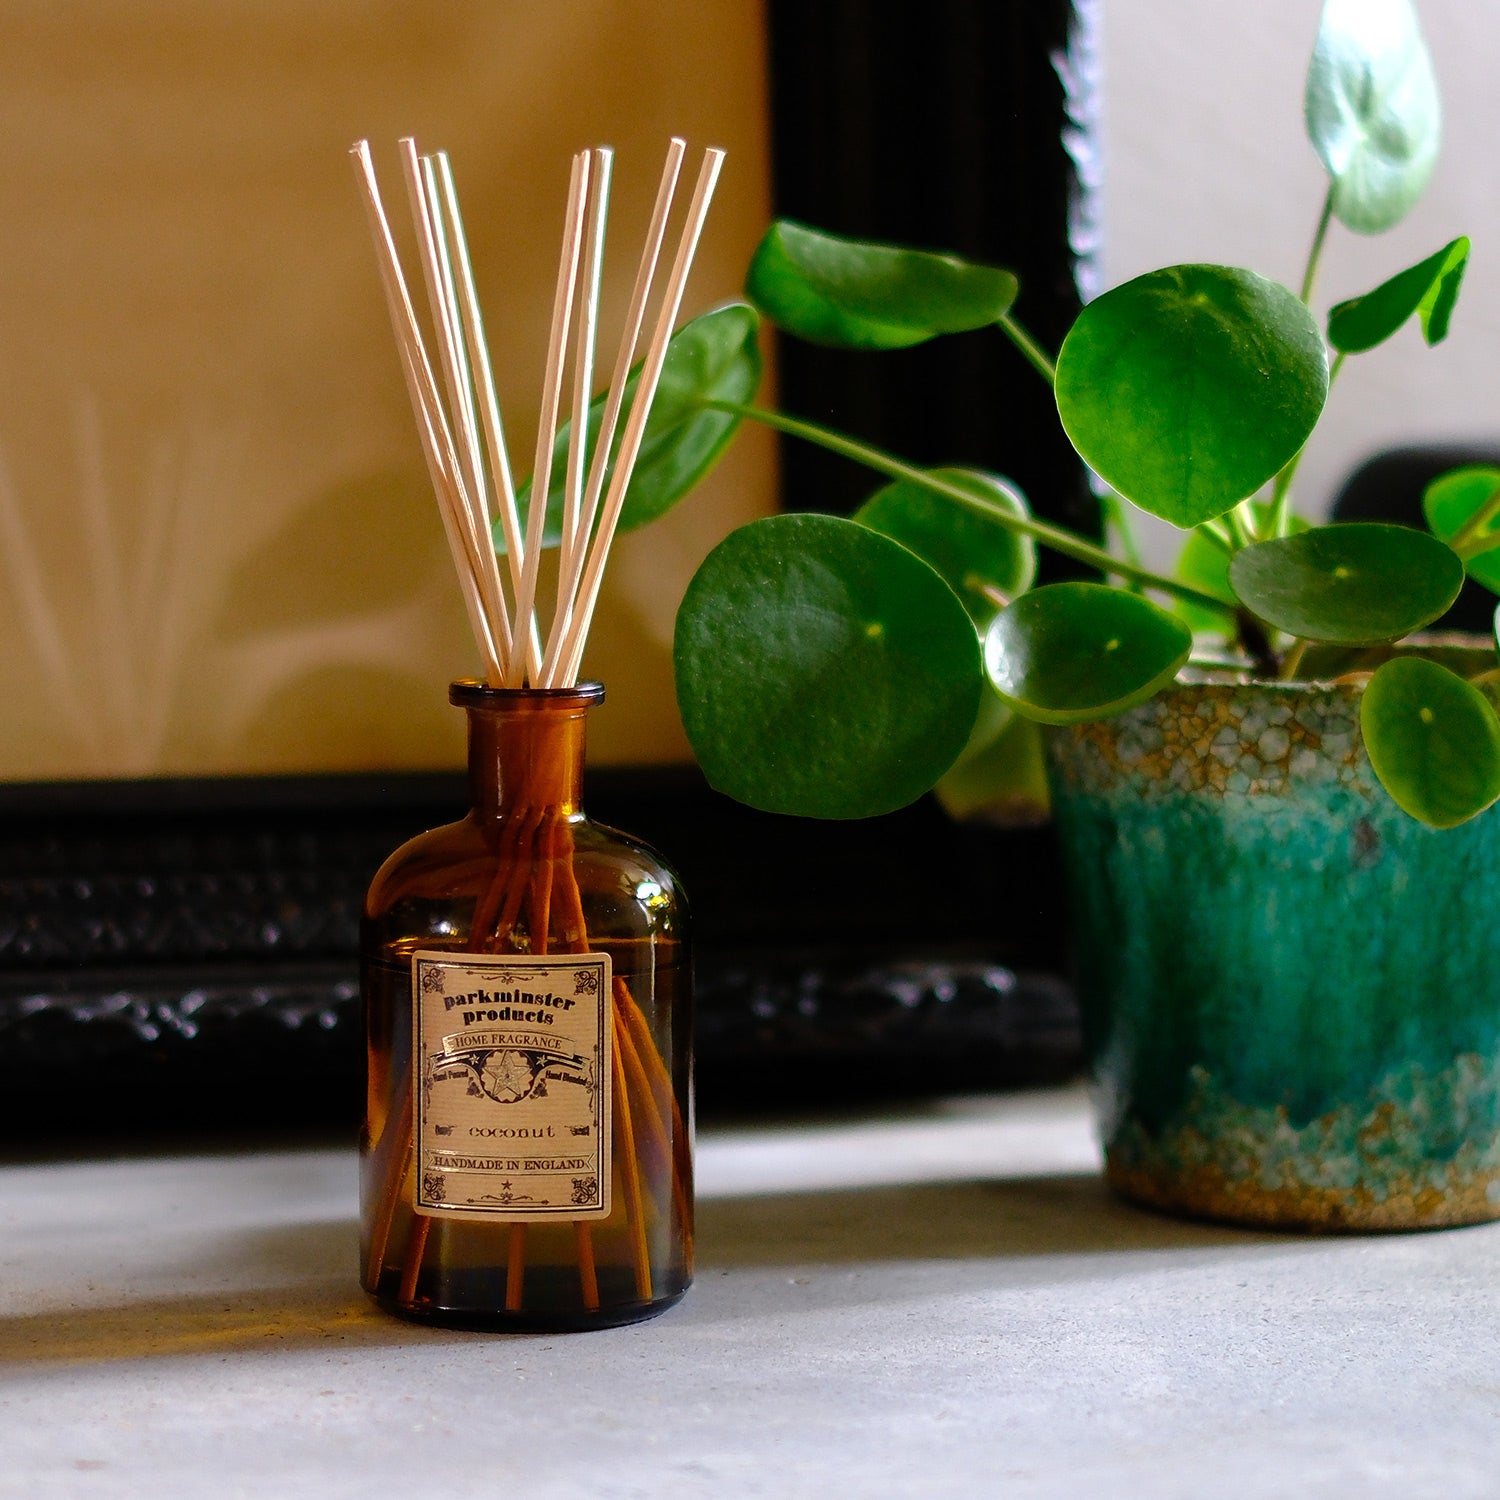 Experience the tropical and sweet Coconut Reed Diffuser from Parkminster, 200ml fragrance in the Apothecary Collection, handcrafted in Cornwall